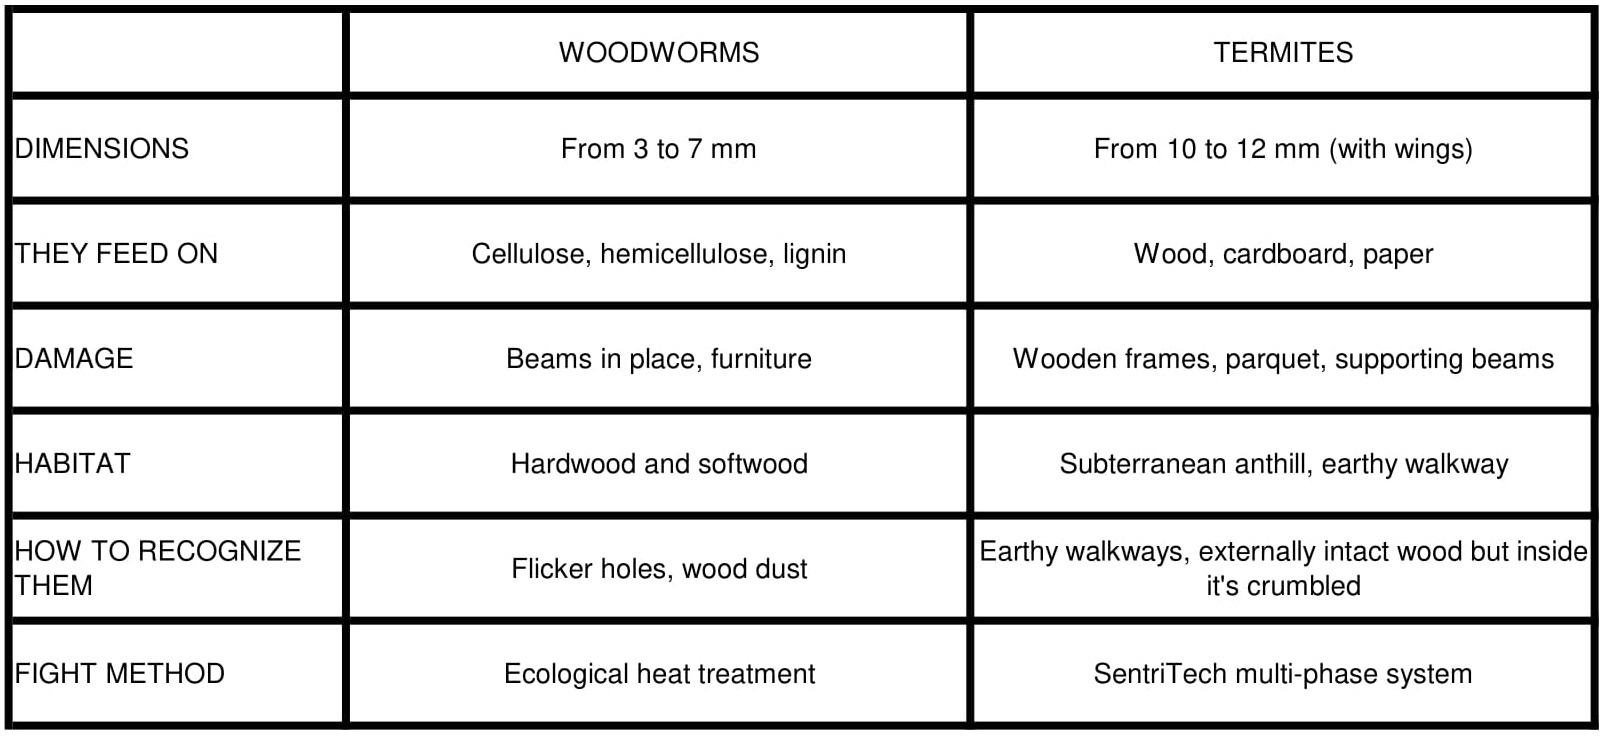 The main differences between Termites and Woodworms infestations